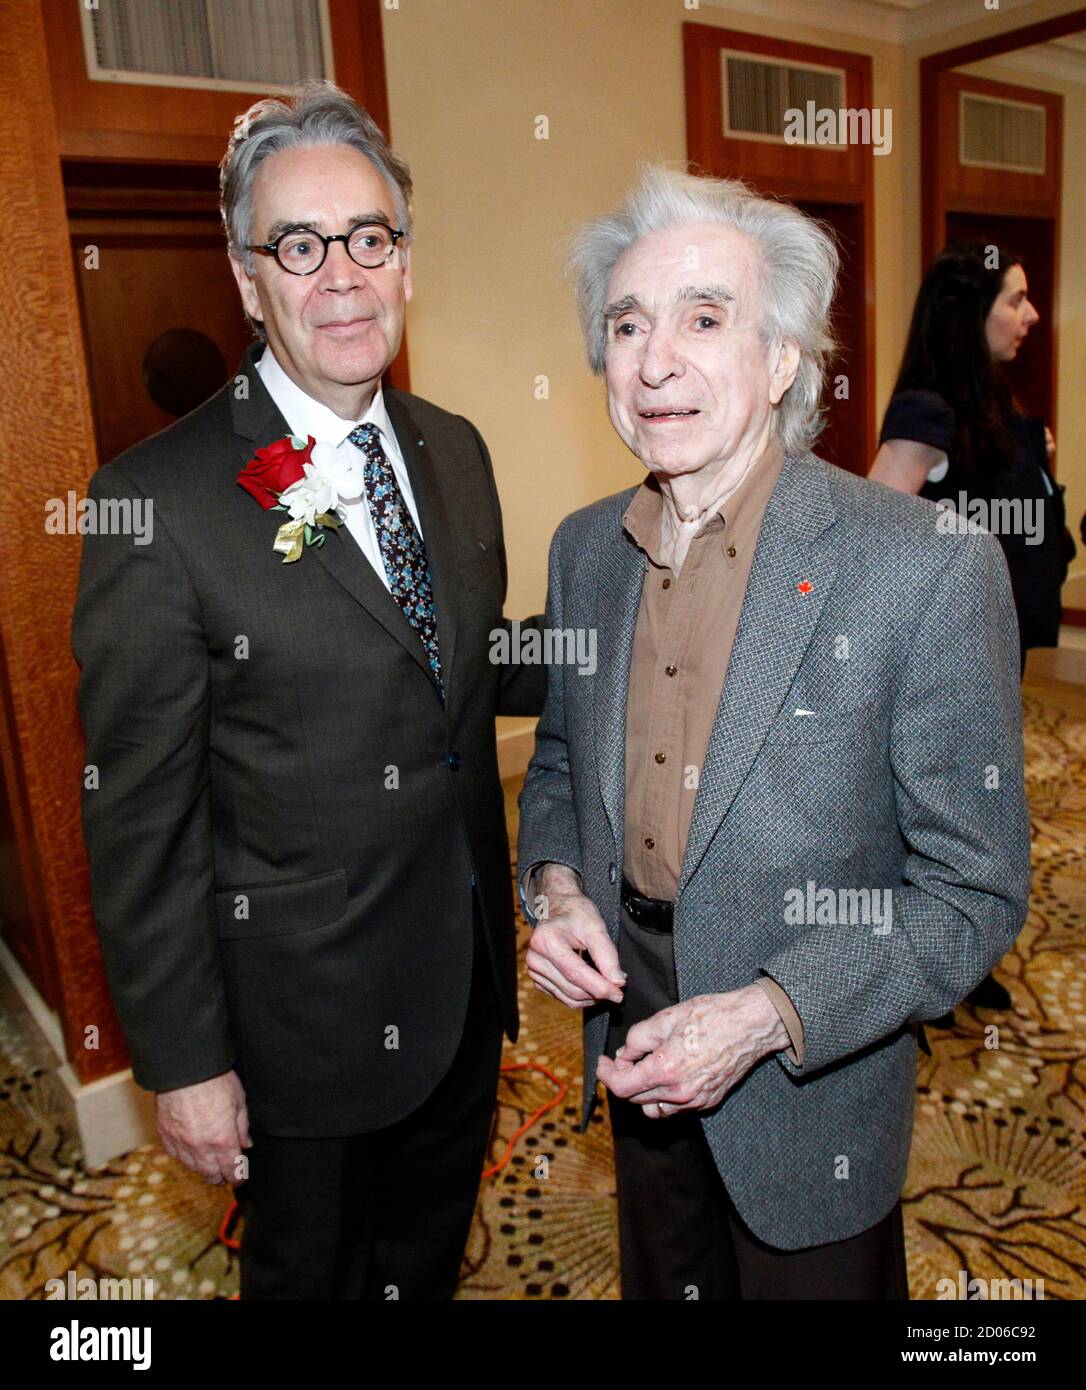 Composer Howard Shore (L), nominated for an Academy Award for Music (Original Score) for 'Hugo,' poses with director Arthur Hiller during a reception to celebrate the Canadian Oscar nominees in Beverly Hills, California February 23, 2012. The Academy Awards will be given out in Hollywood February 26. REUTERS/Mario Anzuoni (UNITED STATES - Tags: ENTERTAINMENT) Stock Photo